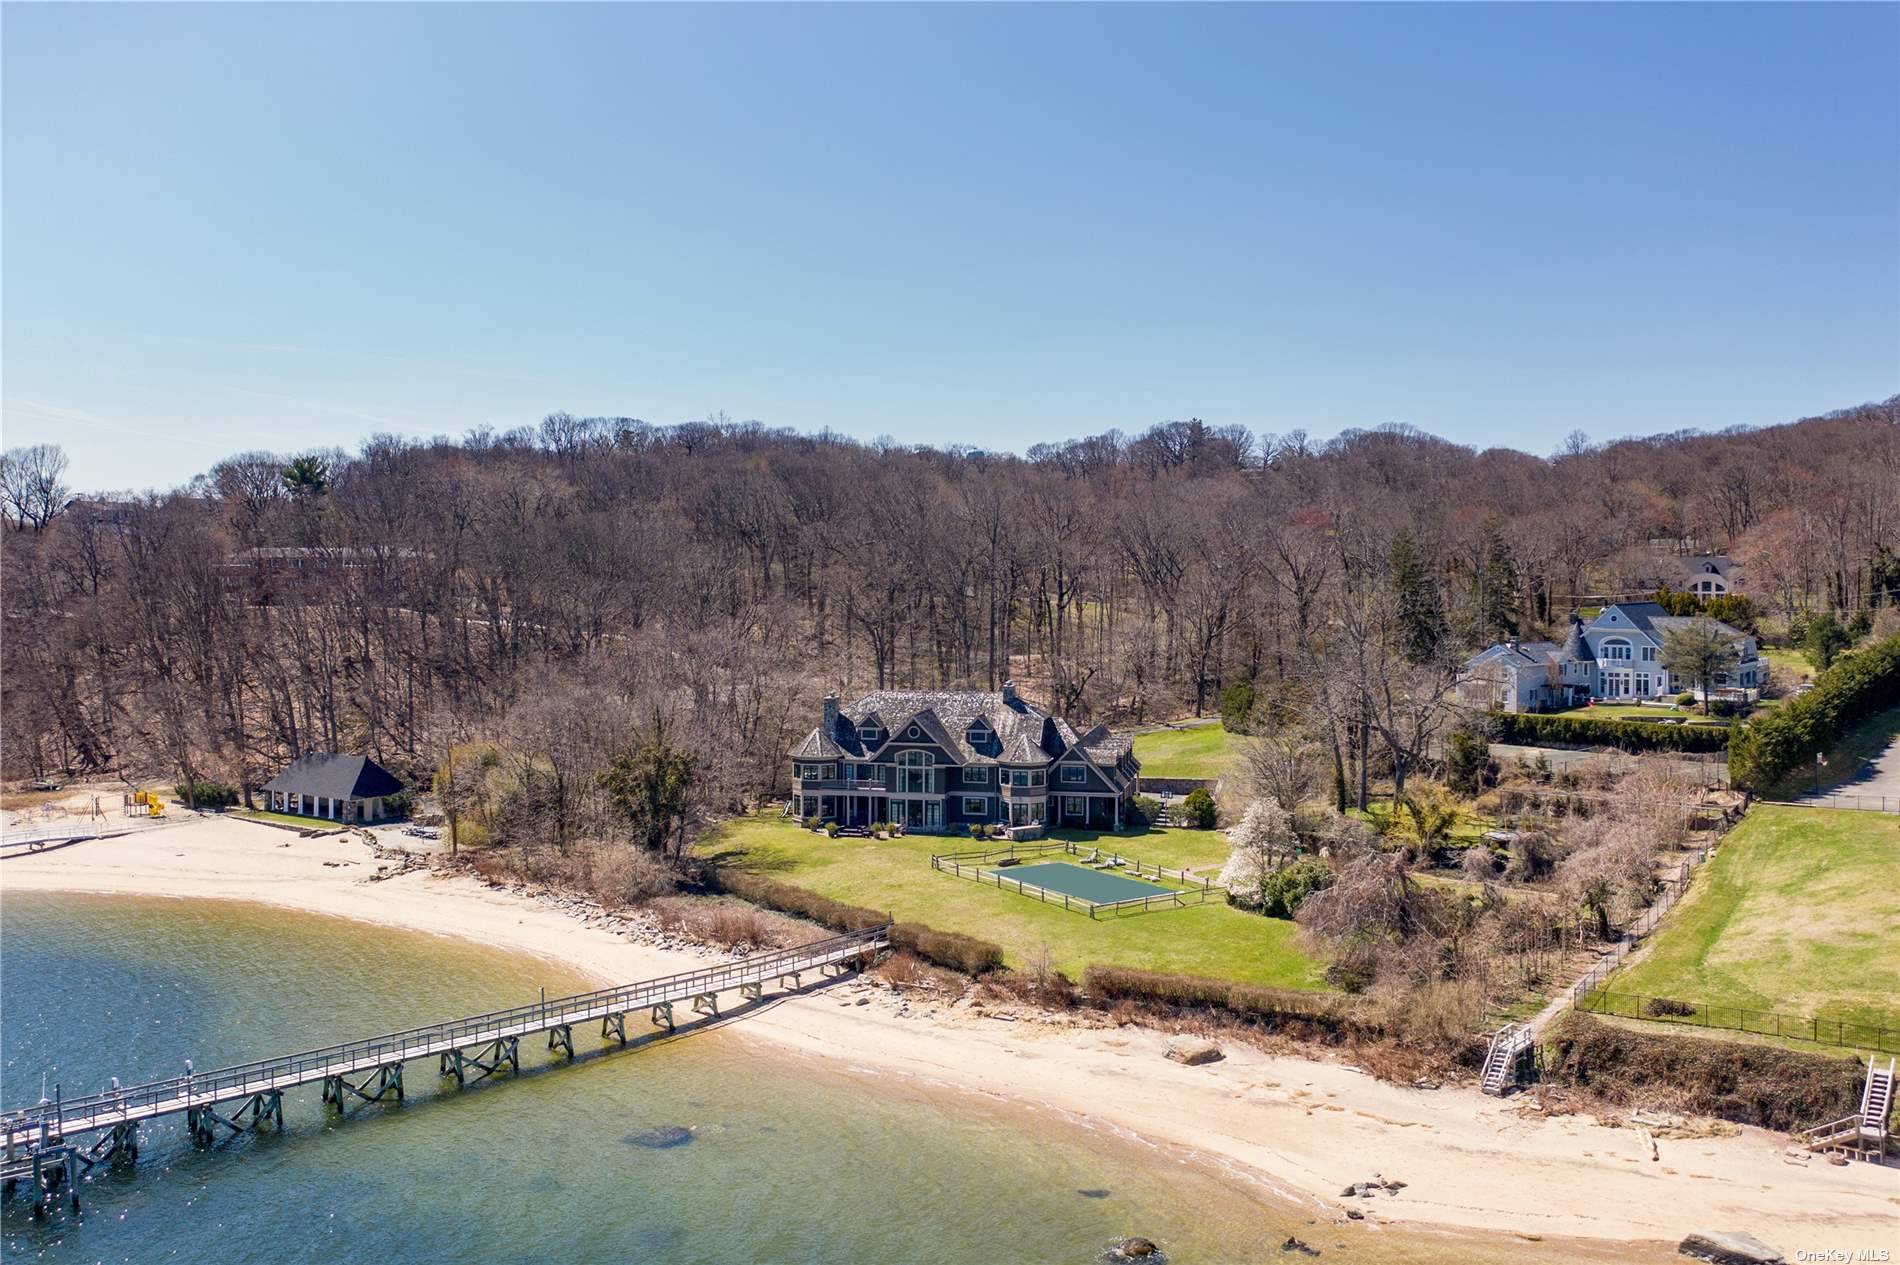 Welcome to 263 Harbor Acres Road, a beautiful 6 bedroom and 7 bathroom Hamptons style shingle home built in 2004 on over 4 acres of prime waterfront land in the ...